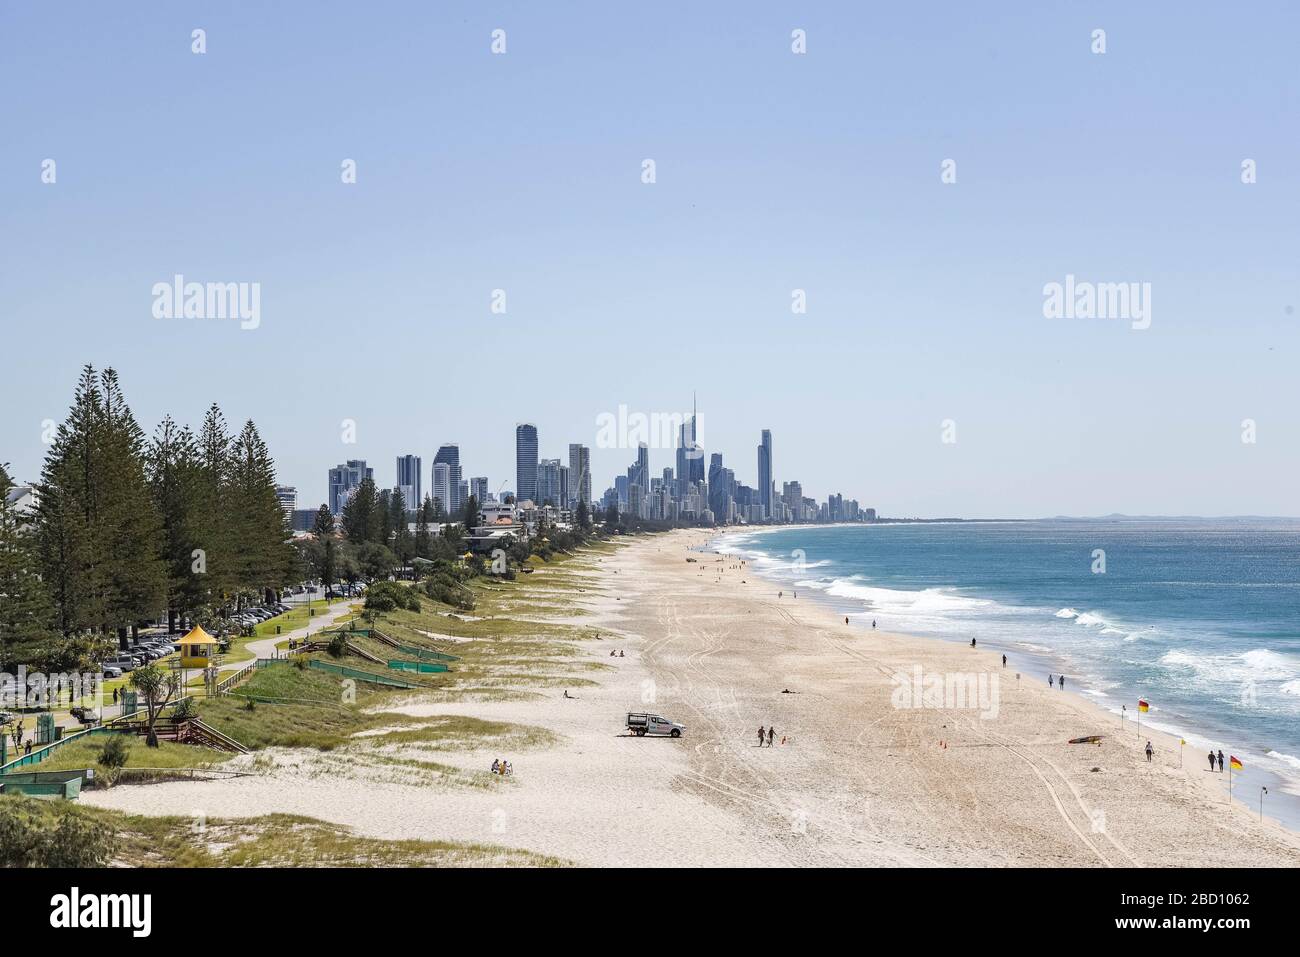 A view of a beach and Surfers Paradise on the Gold Coast.New South Wales and Queensland cities decide to shutdown beaches. Australian authorities are taking actions to reduce crowded places including beaches to stop the spread of Covid-19. Stock Photo